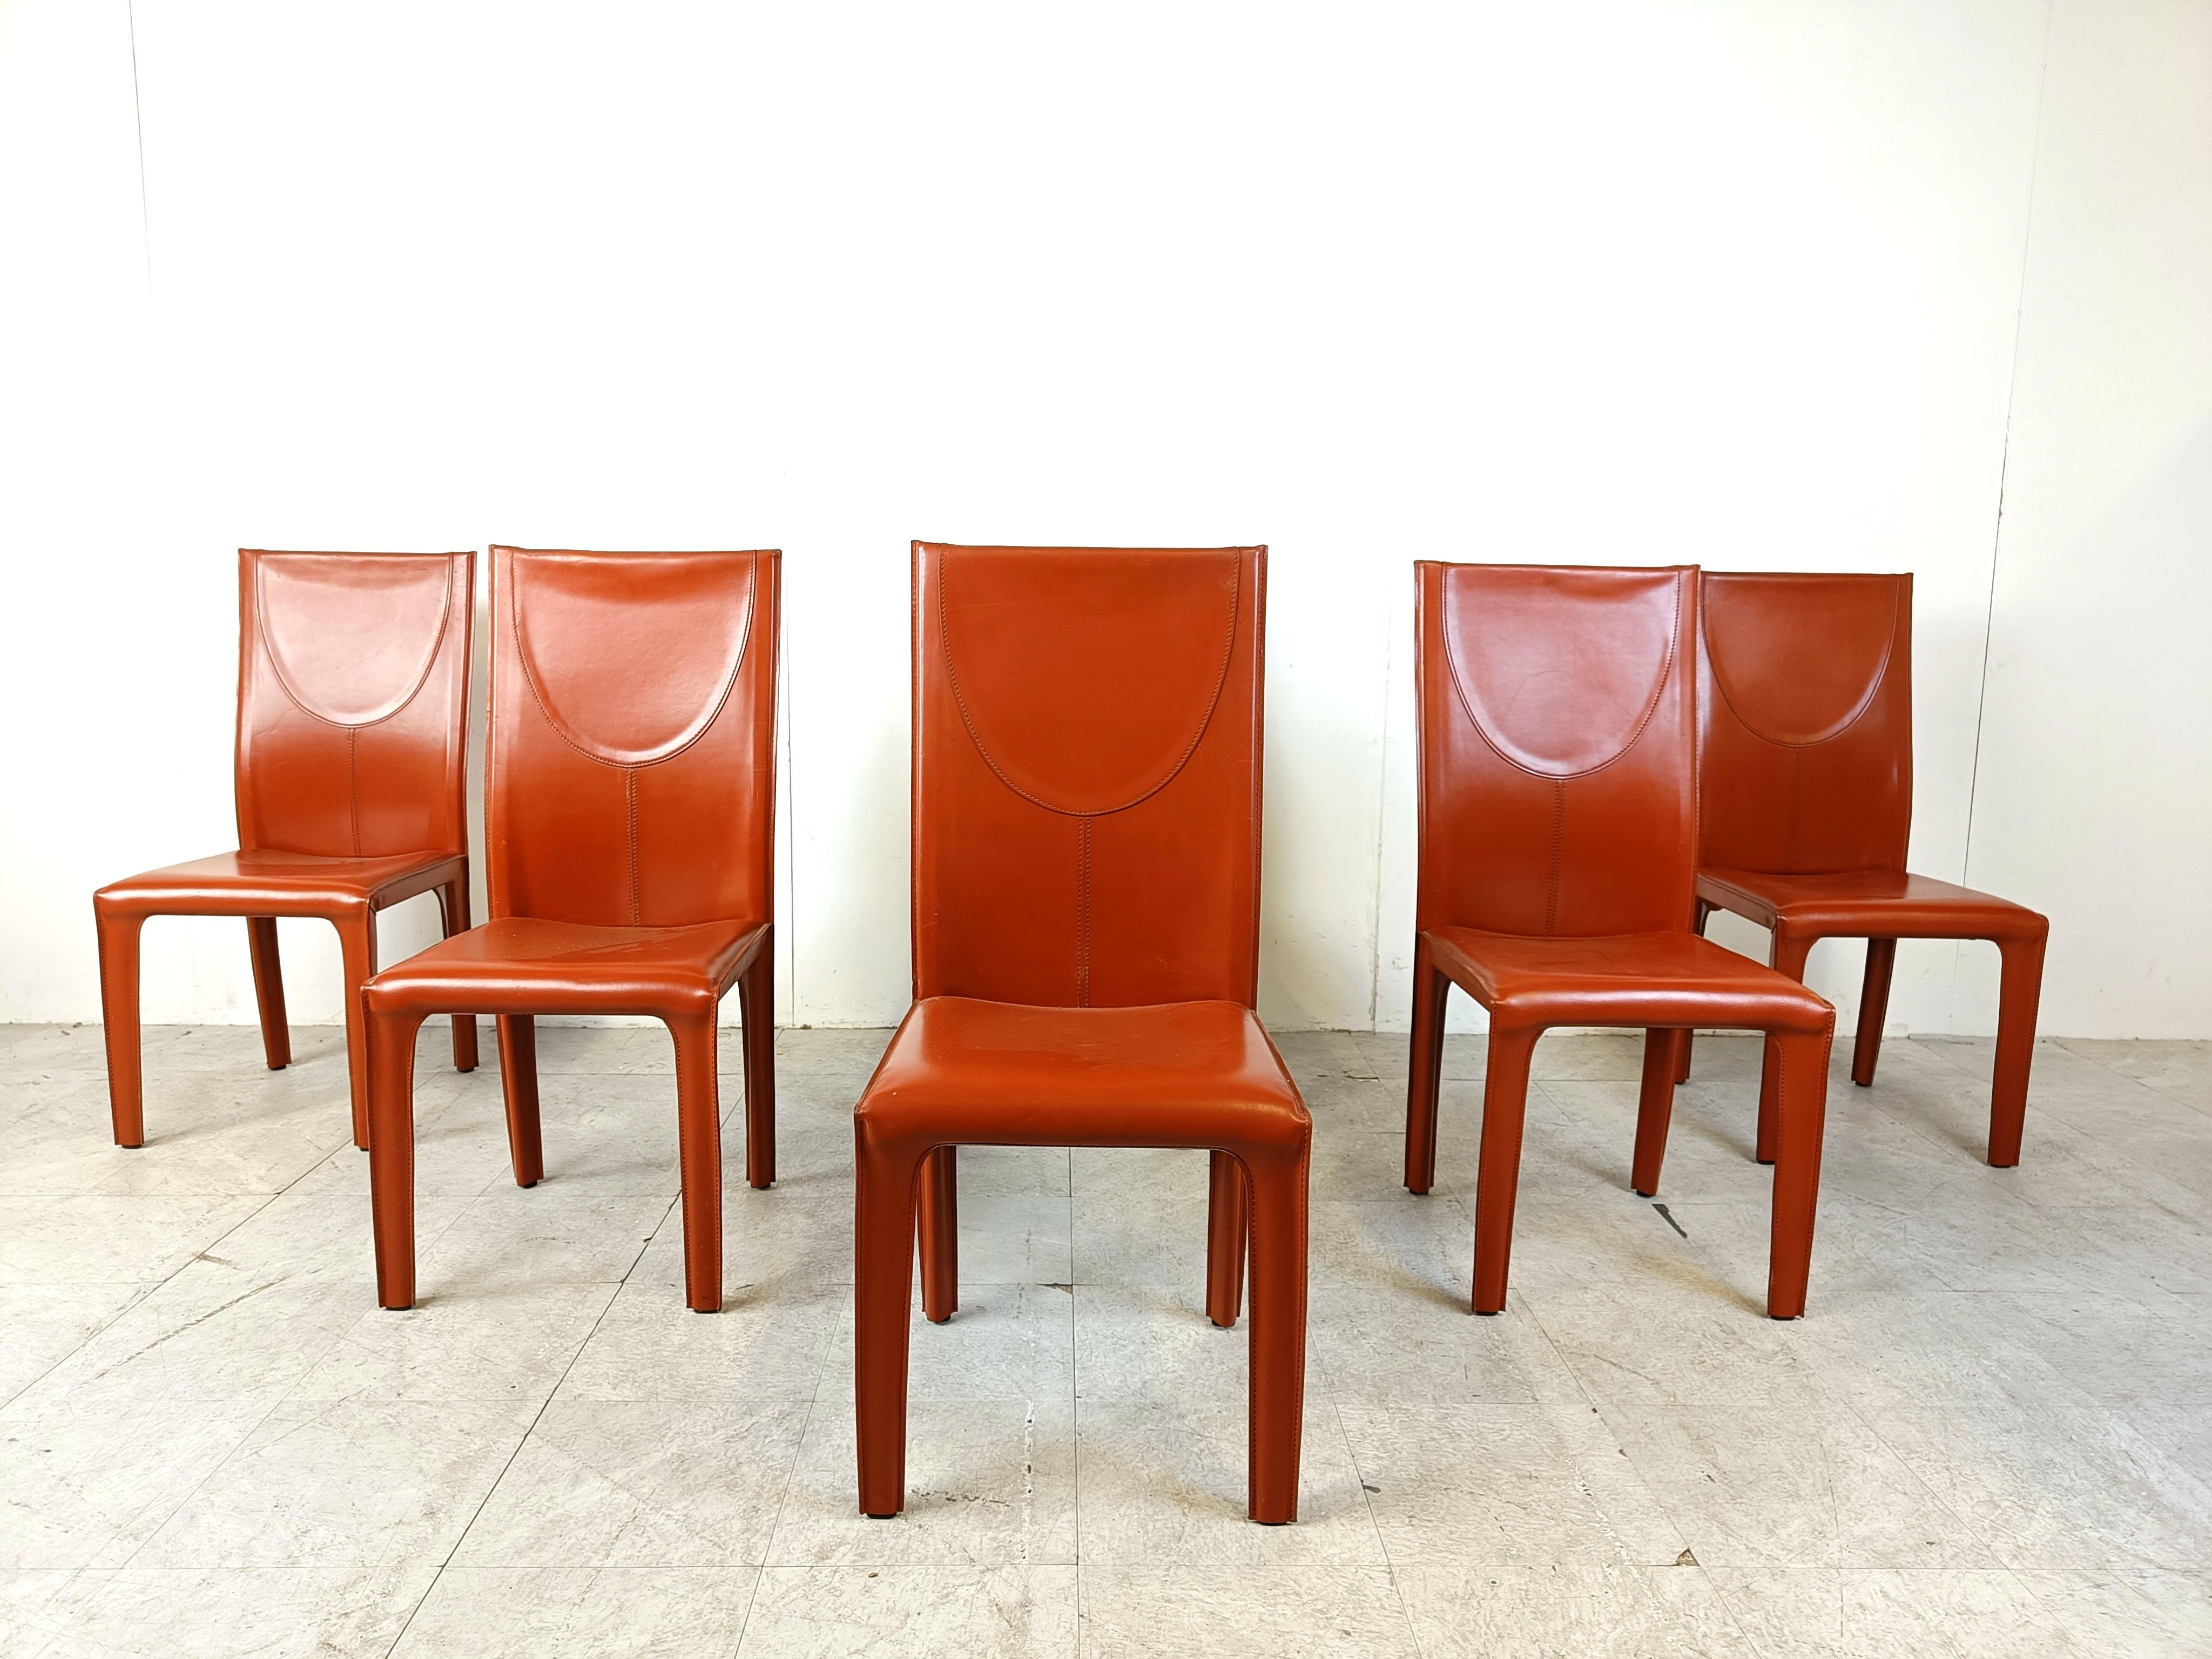 Italian Red leather dining chairs by Arper italy, 1980s - set of 6 For Sale